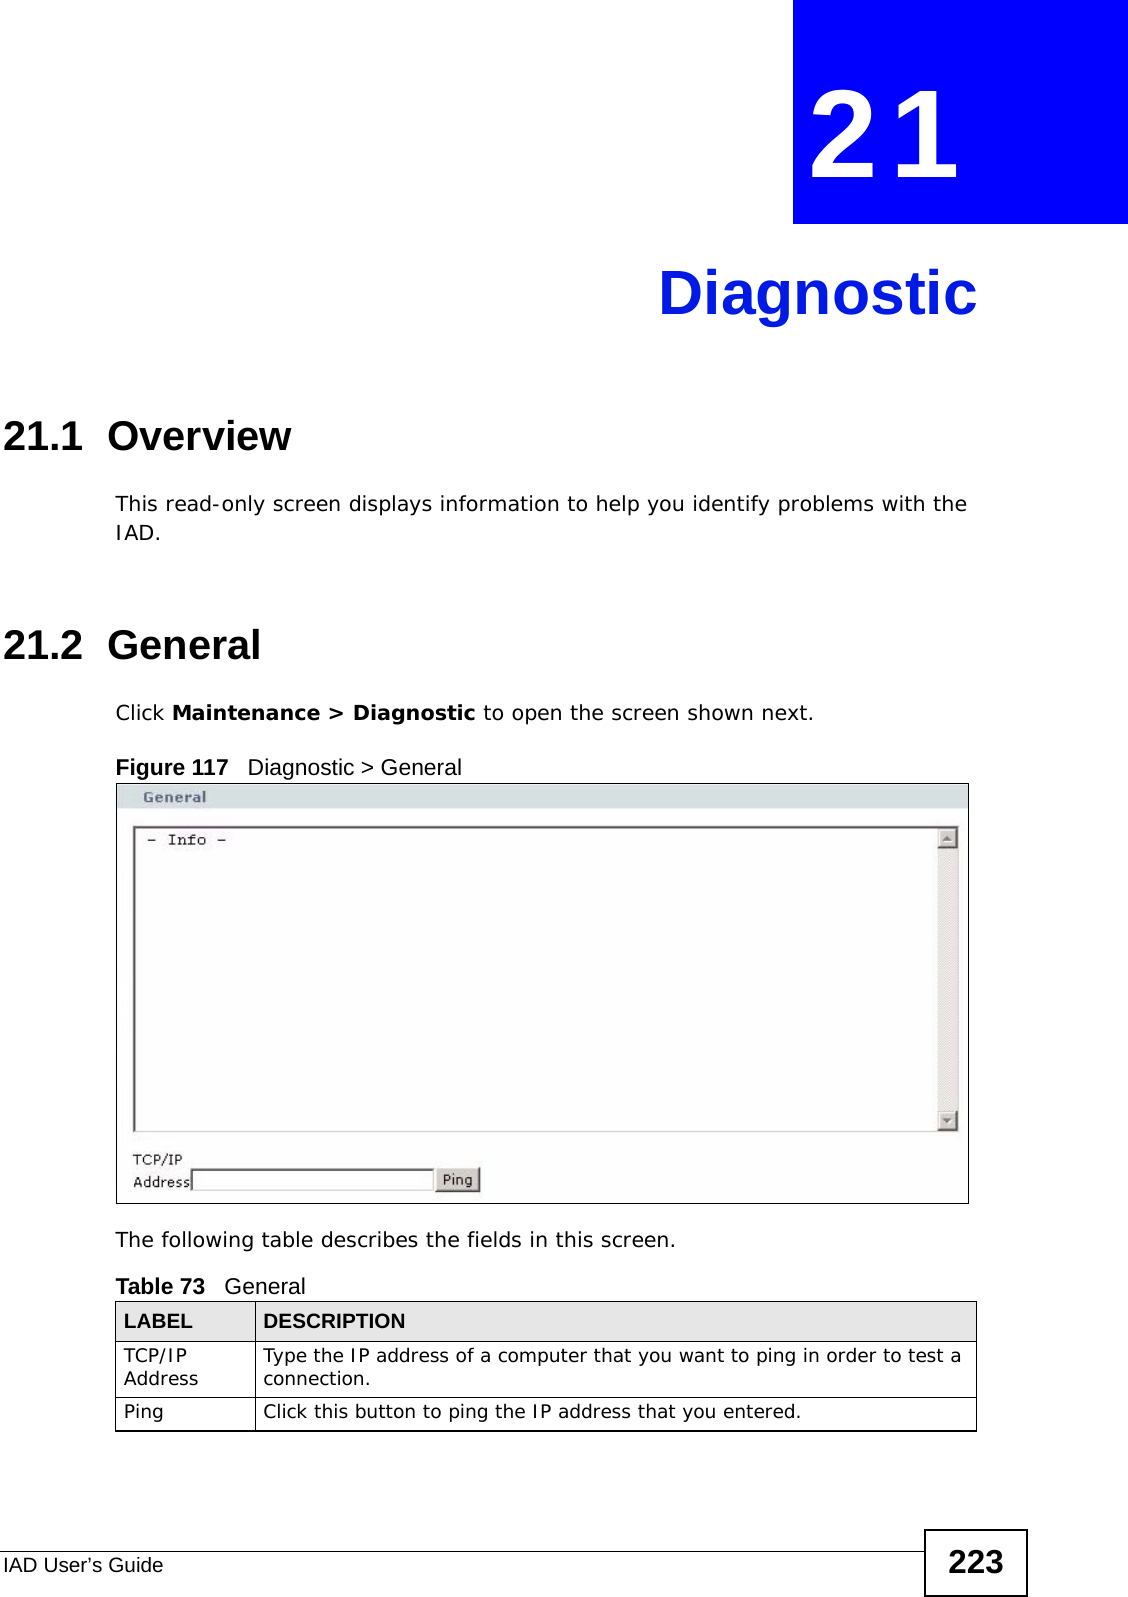 IAD User’s Guide 223CHAPTER  21 Diagnostic21.1  OverviewThis read-only screen displays information to help you identify problems with the IAD.21.2  General  Click Maintenance &gt; Diagnostic to open the screen shown next. Figure 117   Diagnostic &gt; GeneralThe following table describes the fields in this screen. Table 73   GeneralLABEL DESCRIPTIONTCP/IP Address Type the IP address of a computer that you want to ping in order to test a connection.Ping Click this button to ping the IP address that you entered.